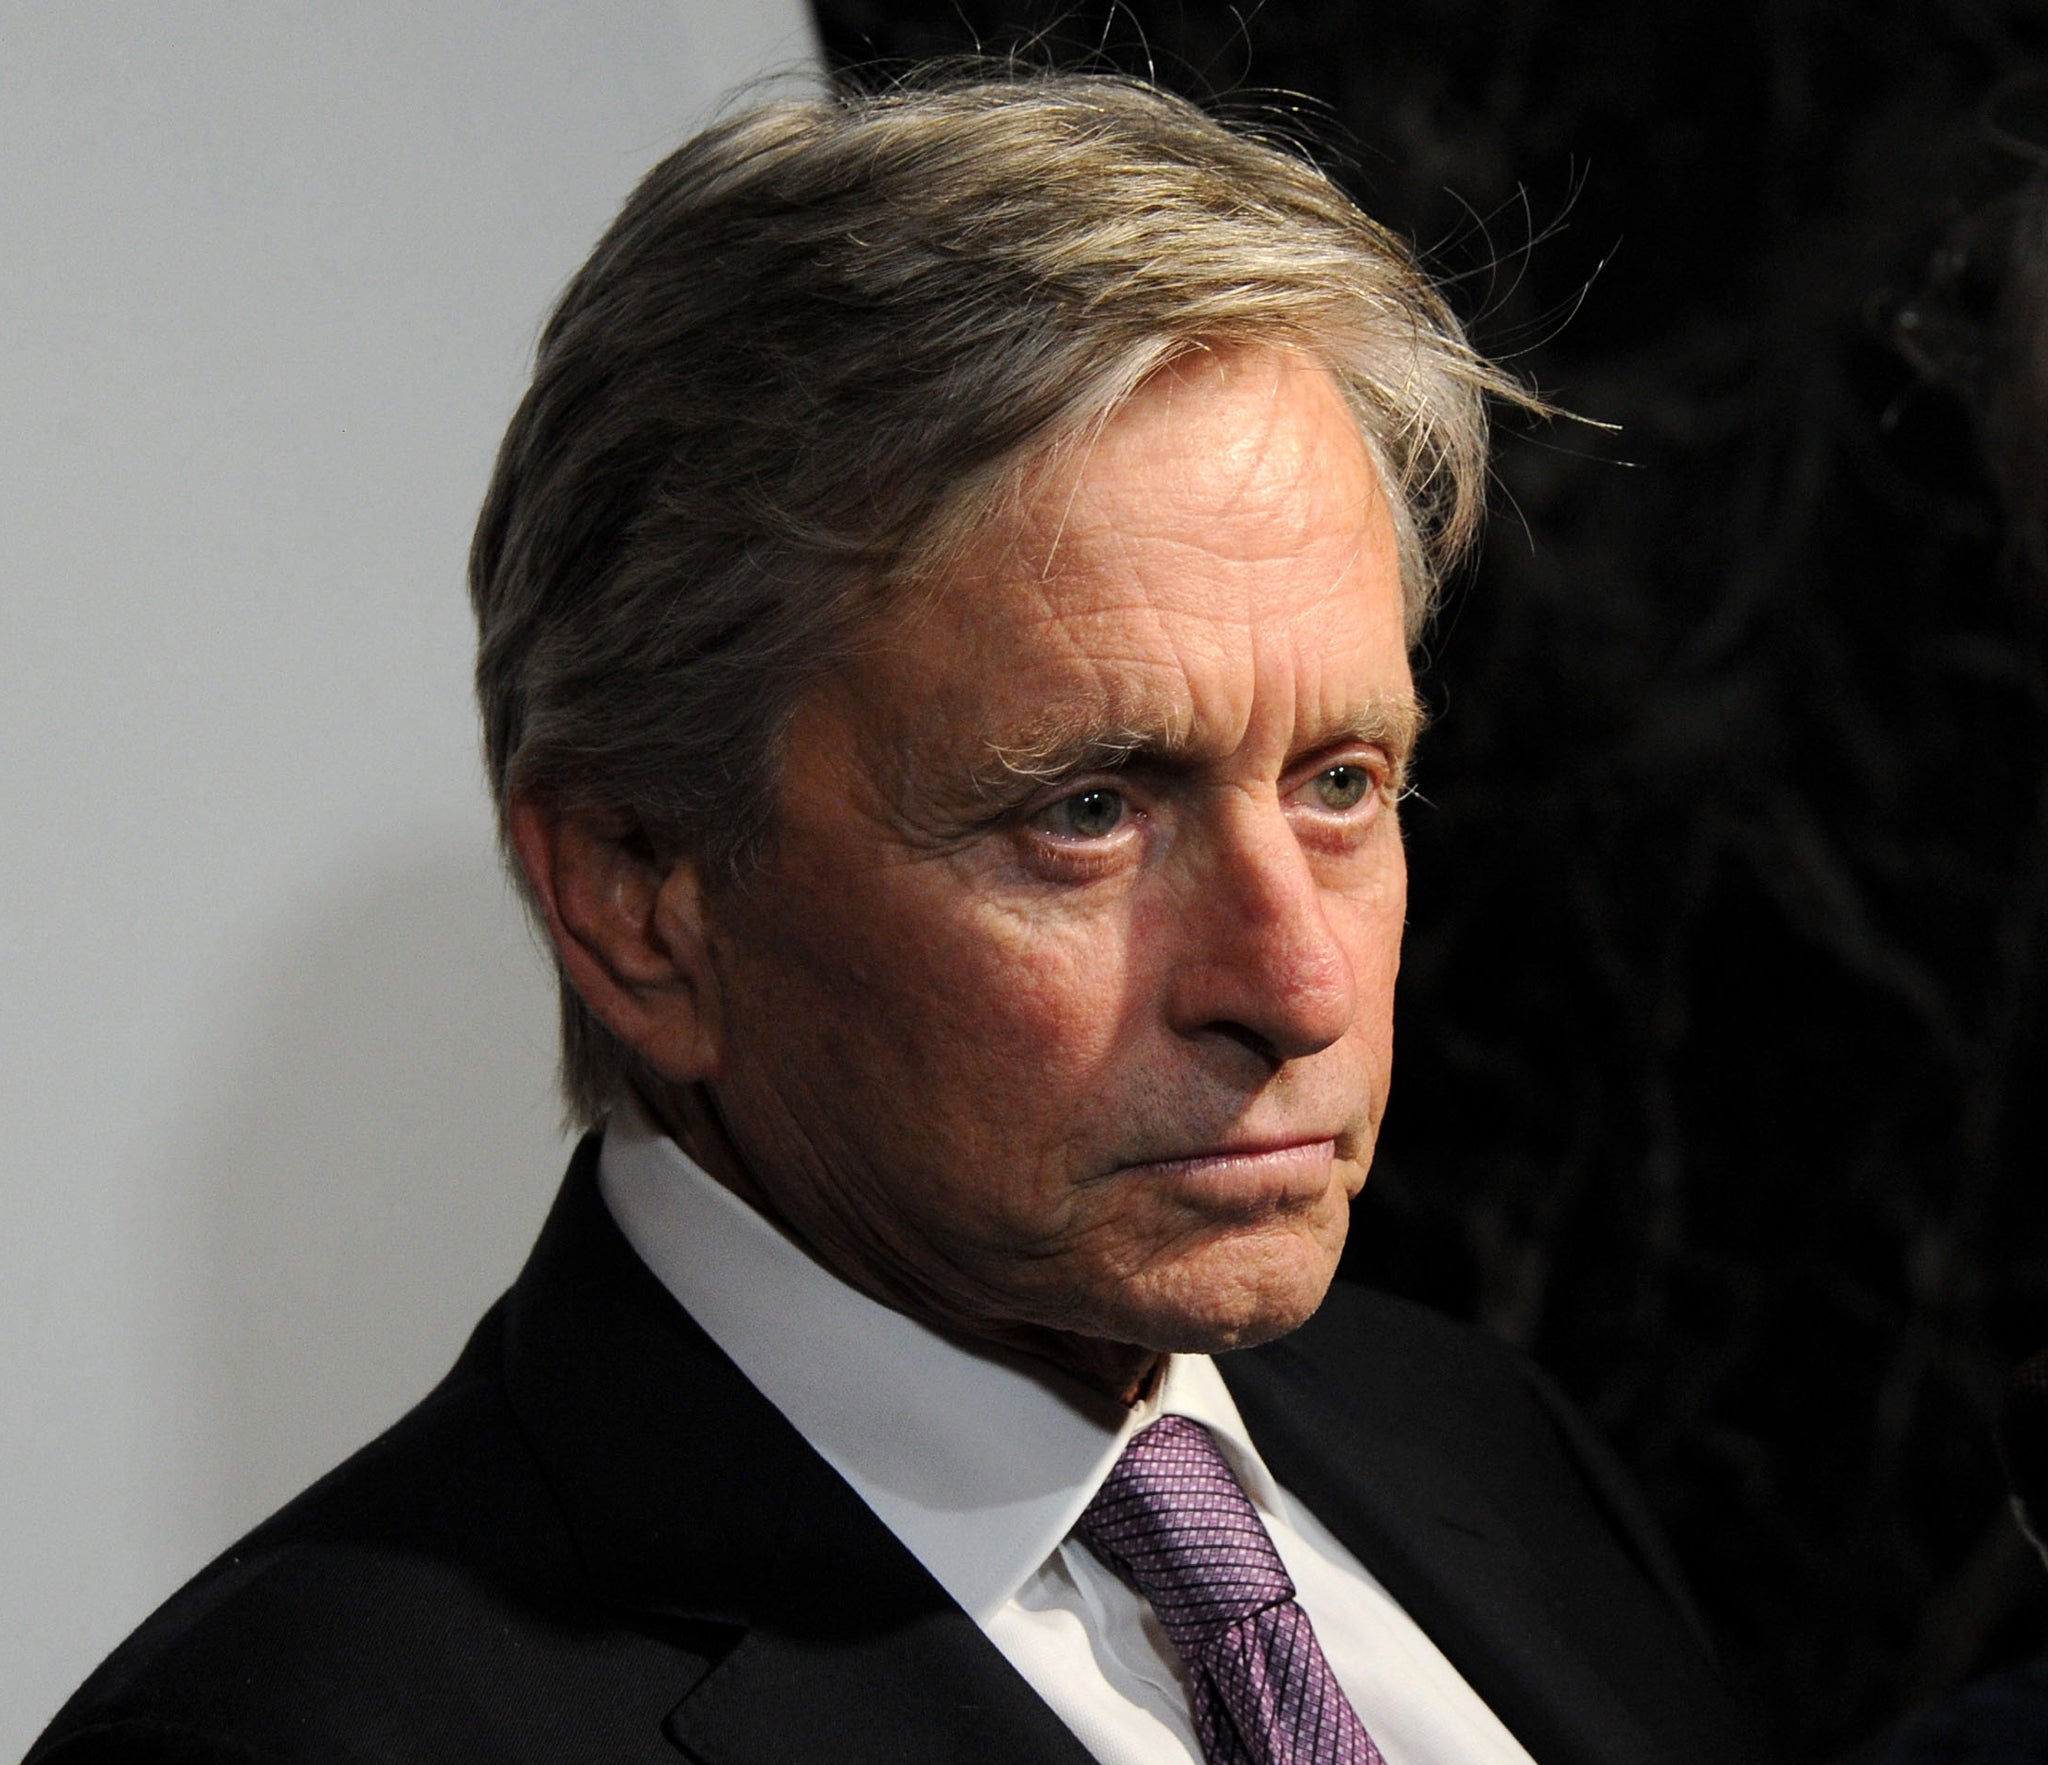 Michael Douglas has denied saying his cancer was caused by oral sex